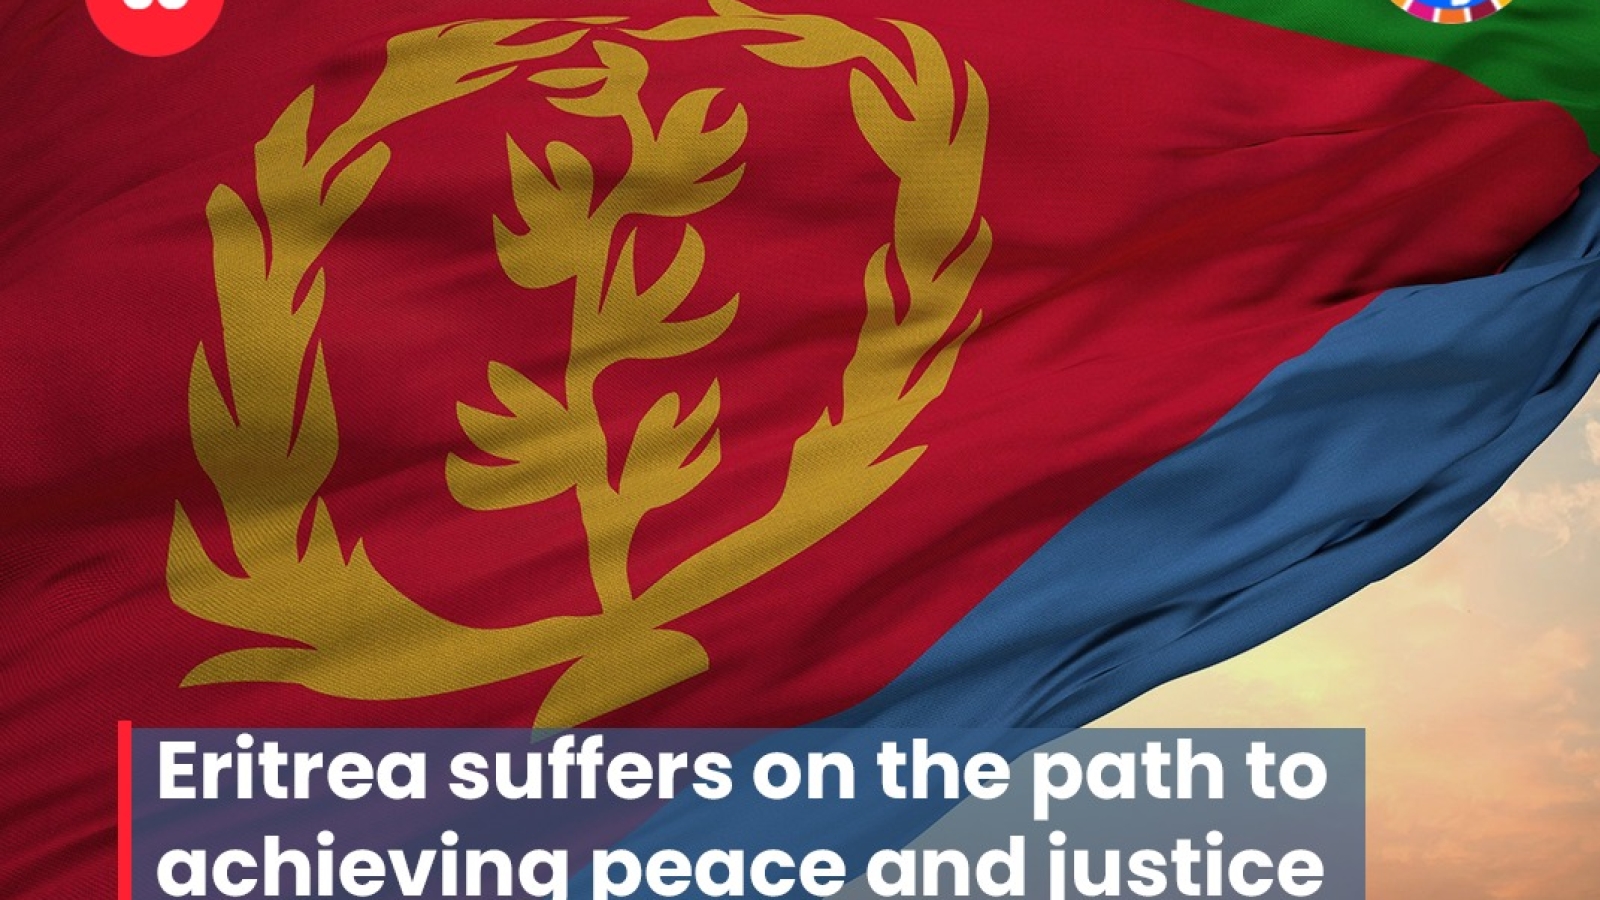 Eritrea suffers on the path to achieving peace and justice